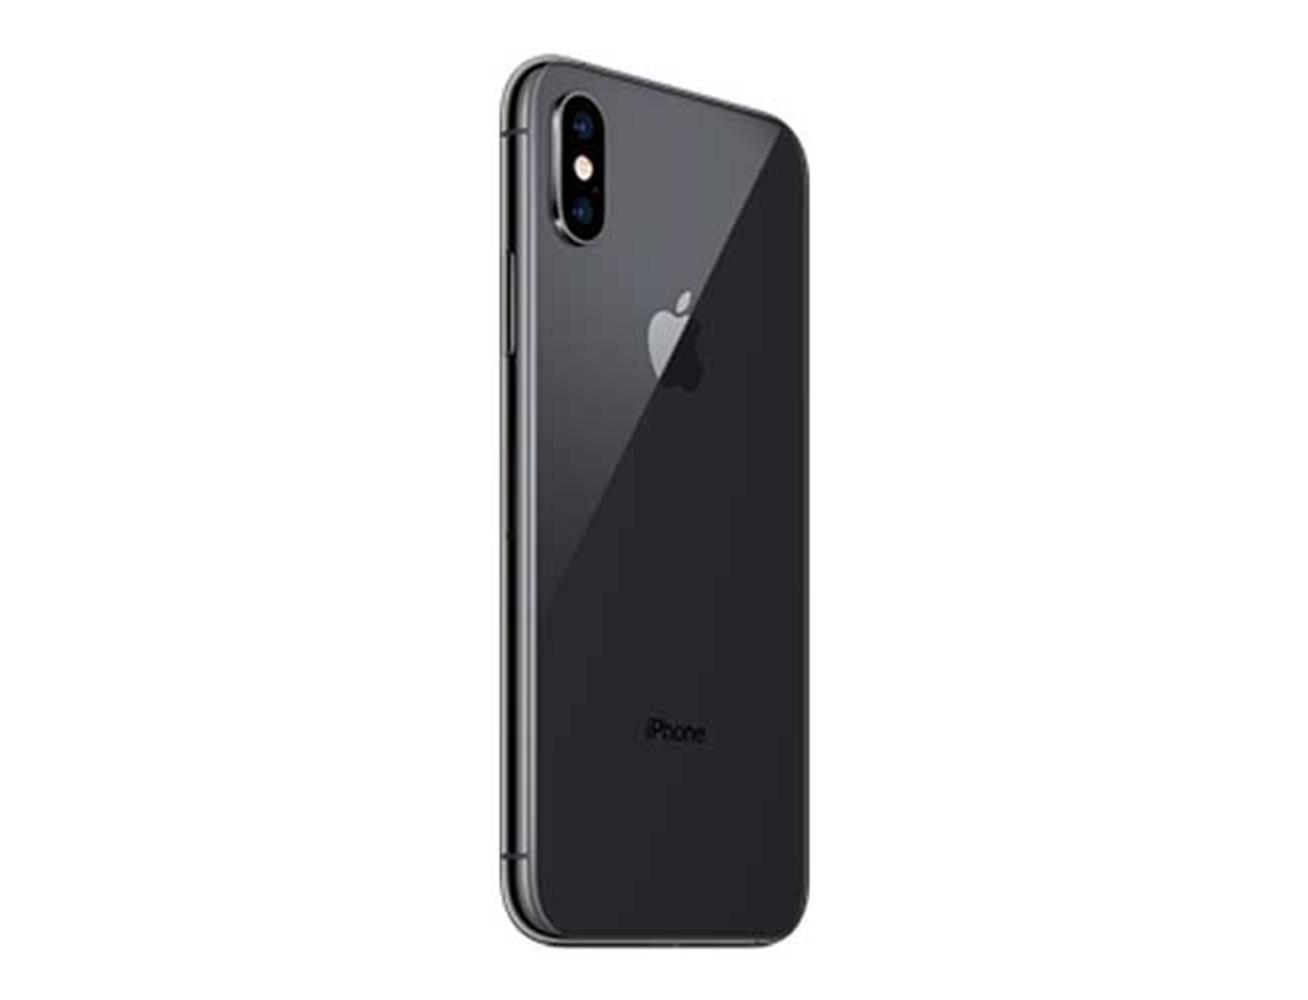 Apple iPhone XS Max 256GB - Space Gray| Blink Kuwait